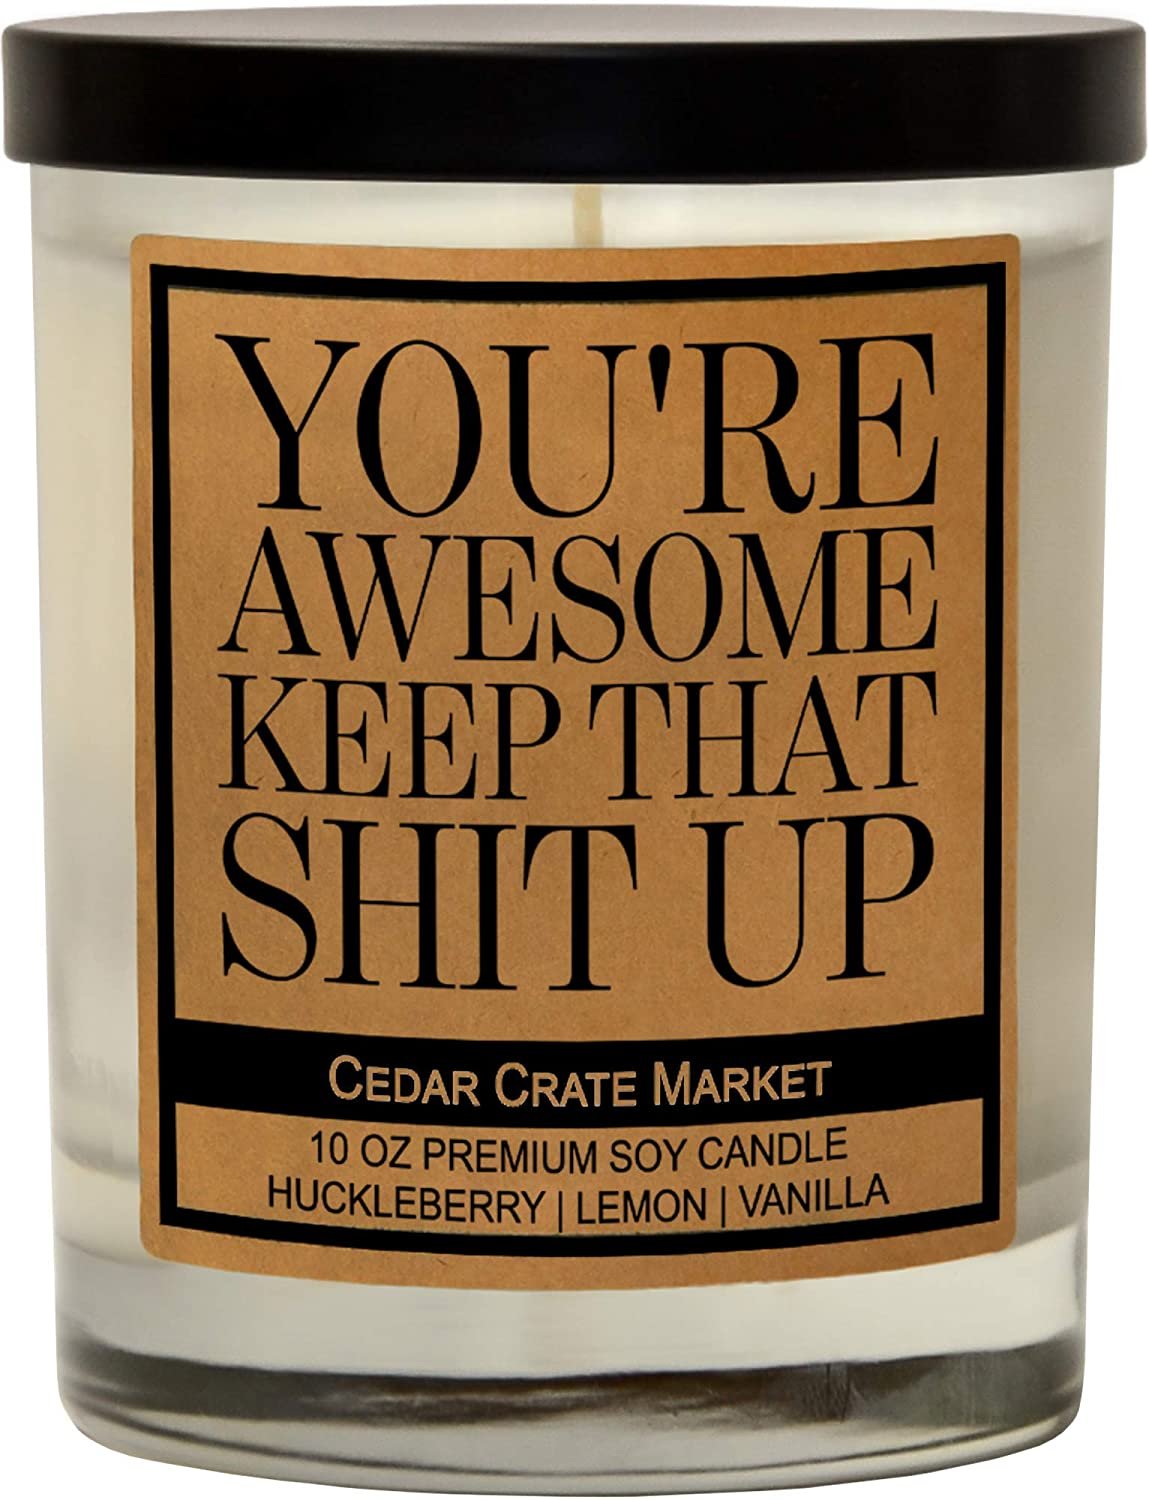 "You're Awesome" Candle